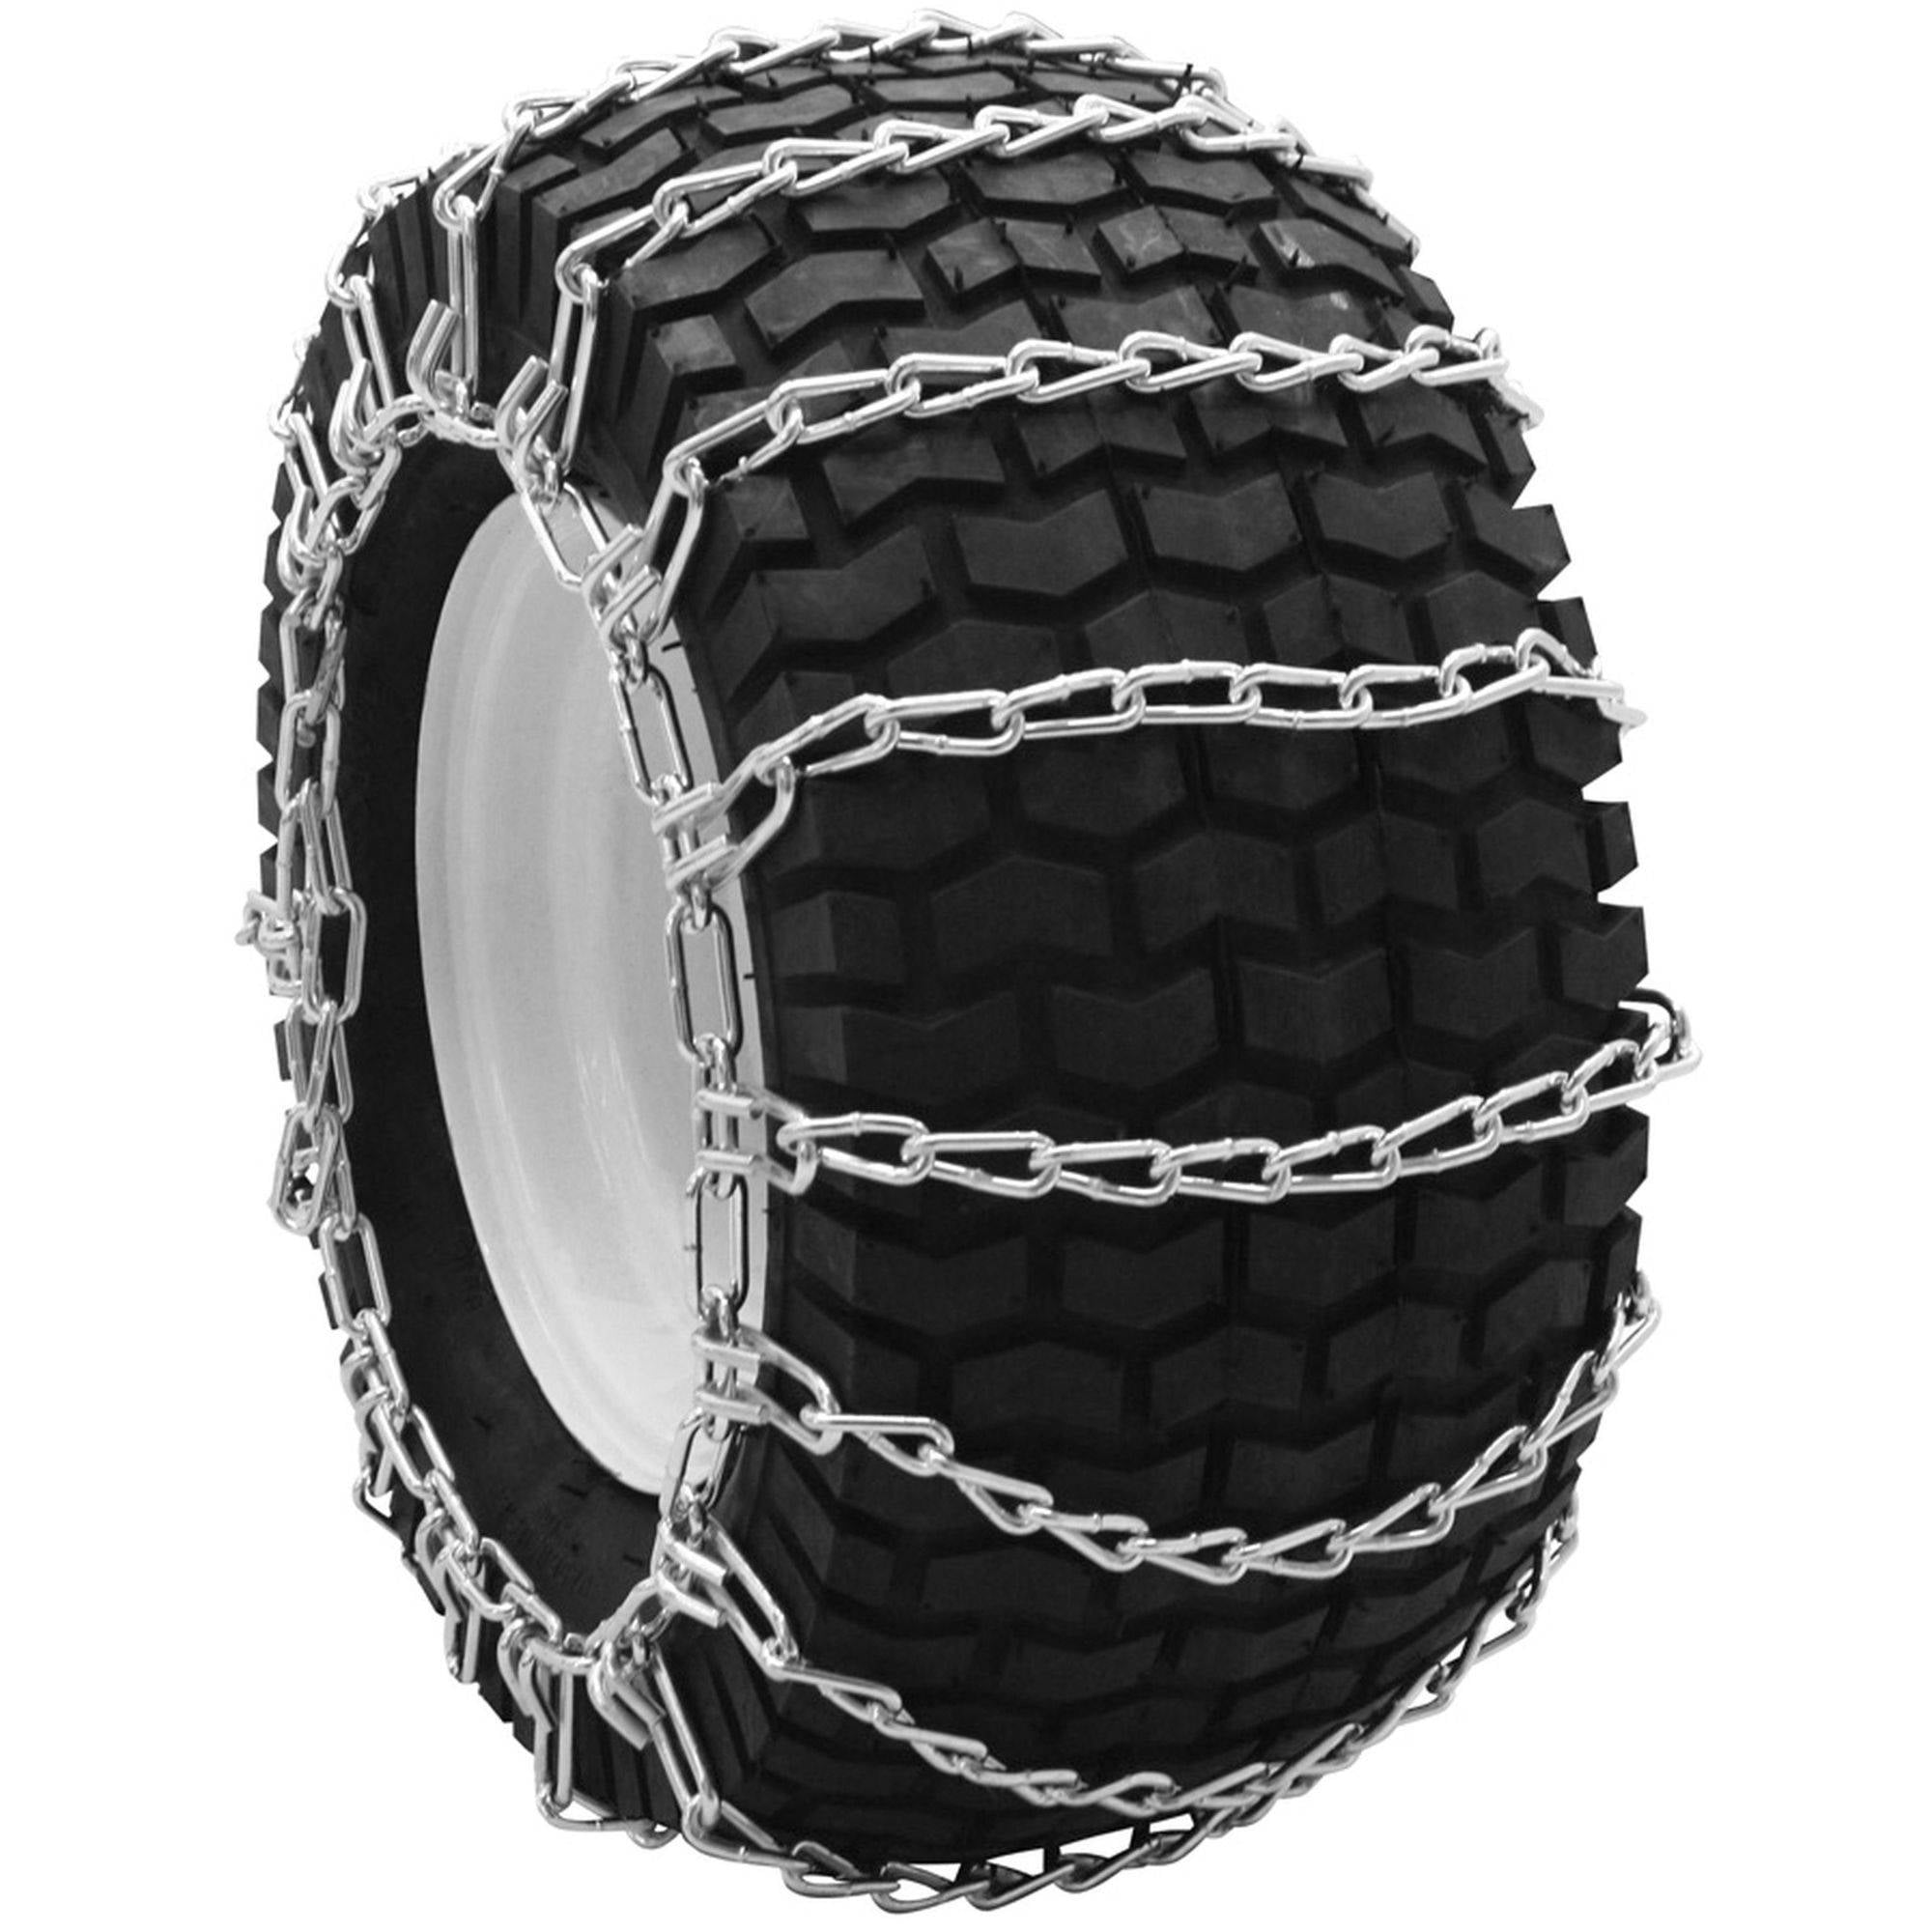 theropshop; TRYK80271680552421 ,#id PAIR 2 Link TIRE CHAINS 23x9.50x12 for Toro Wheel Horse Lawn Mower Tractor Rider 